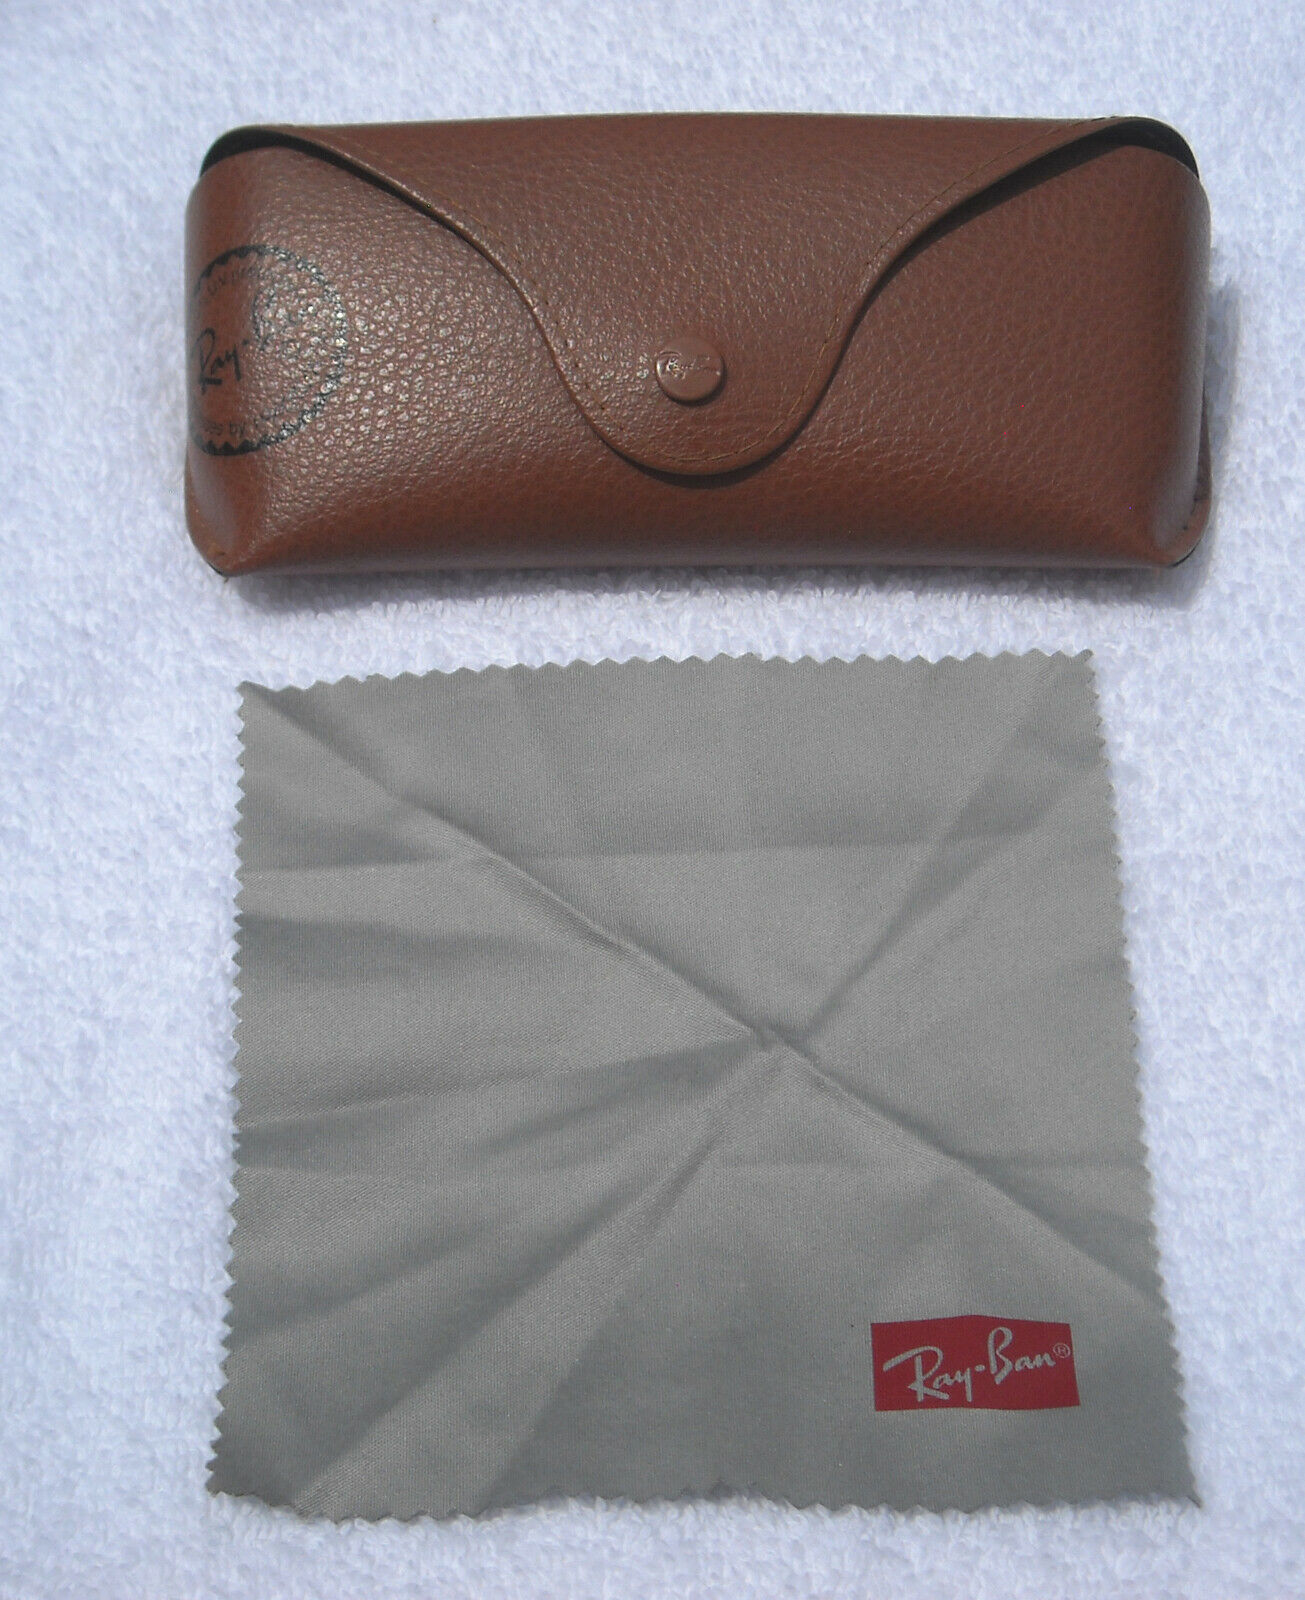 Primary image for Ray Ban tan Leather Case EyeGlass Sunglass Case & lens cloth